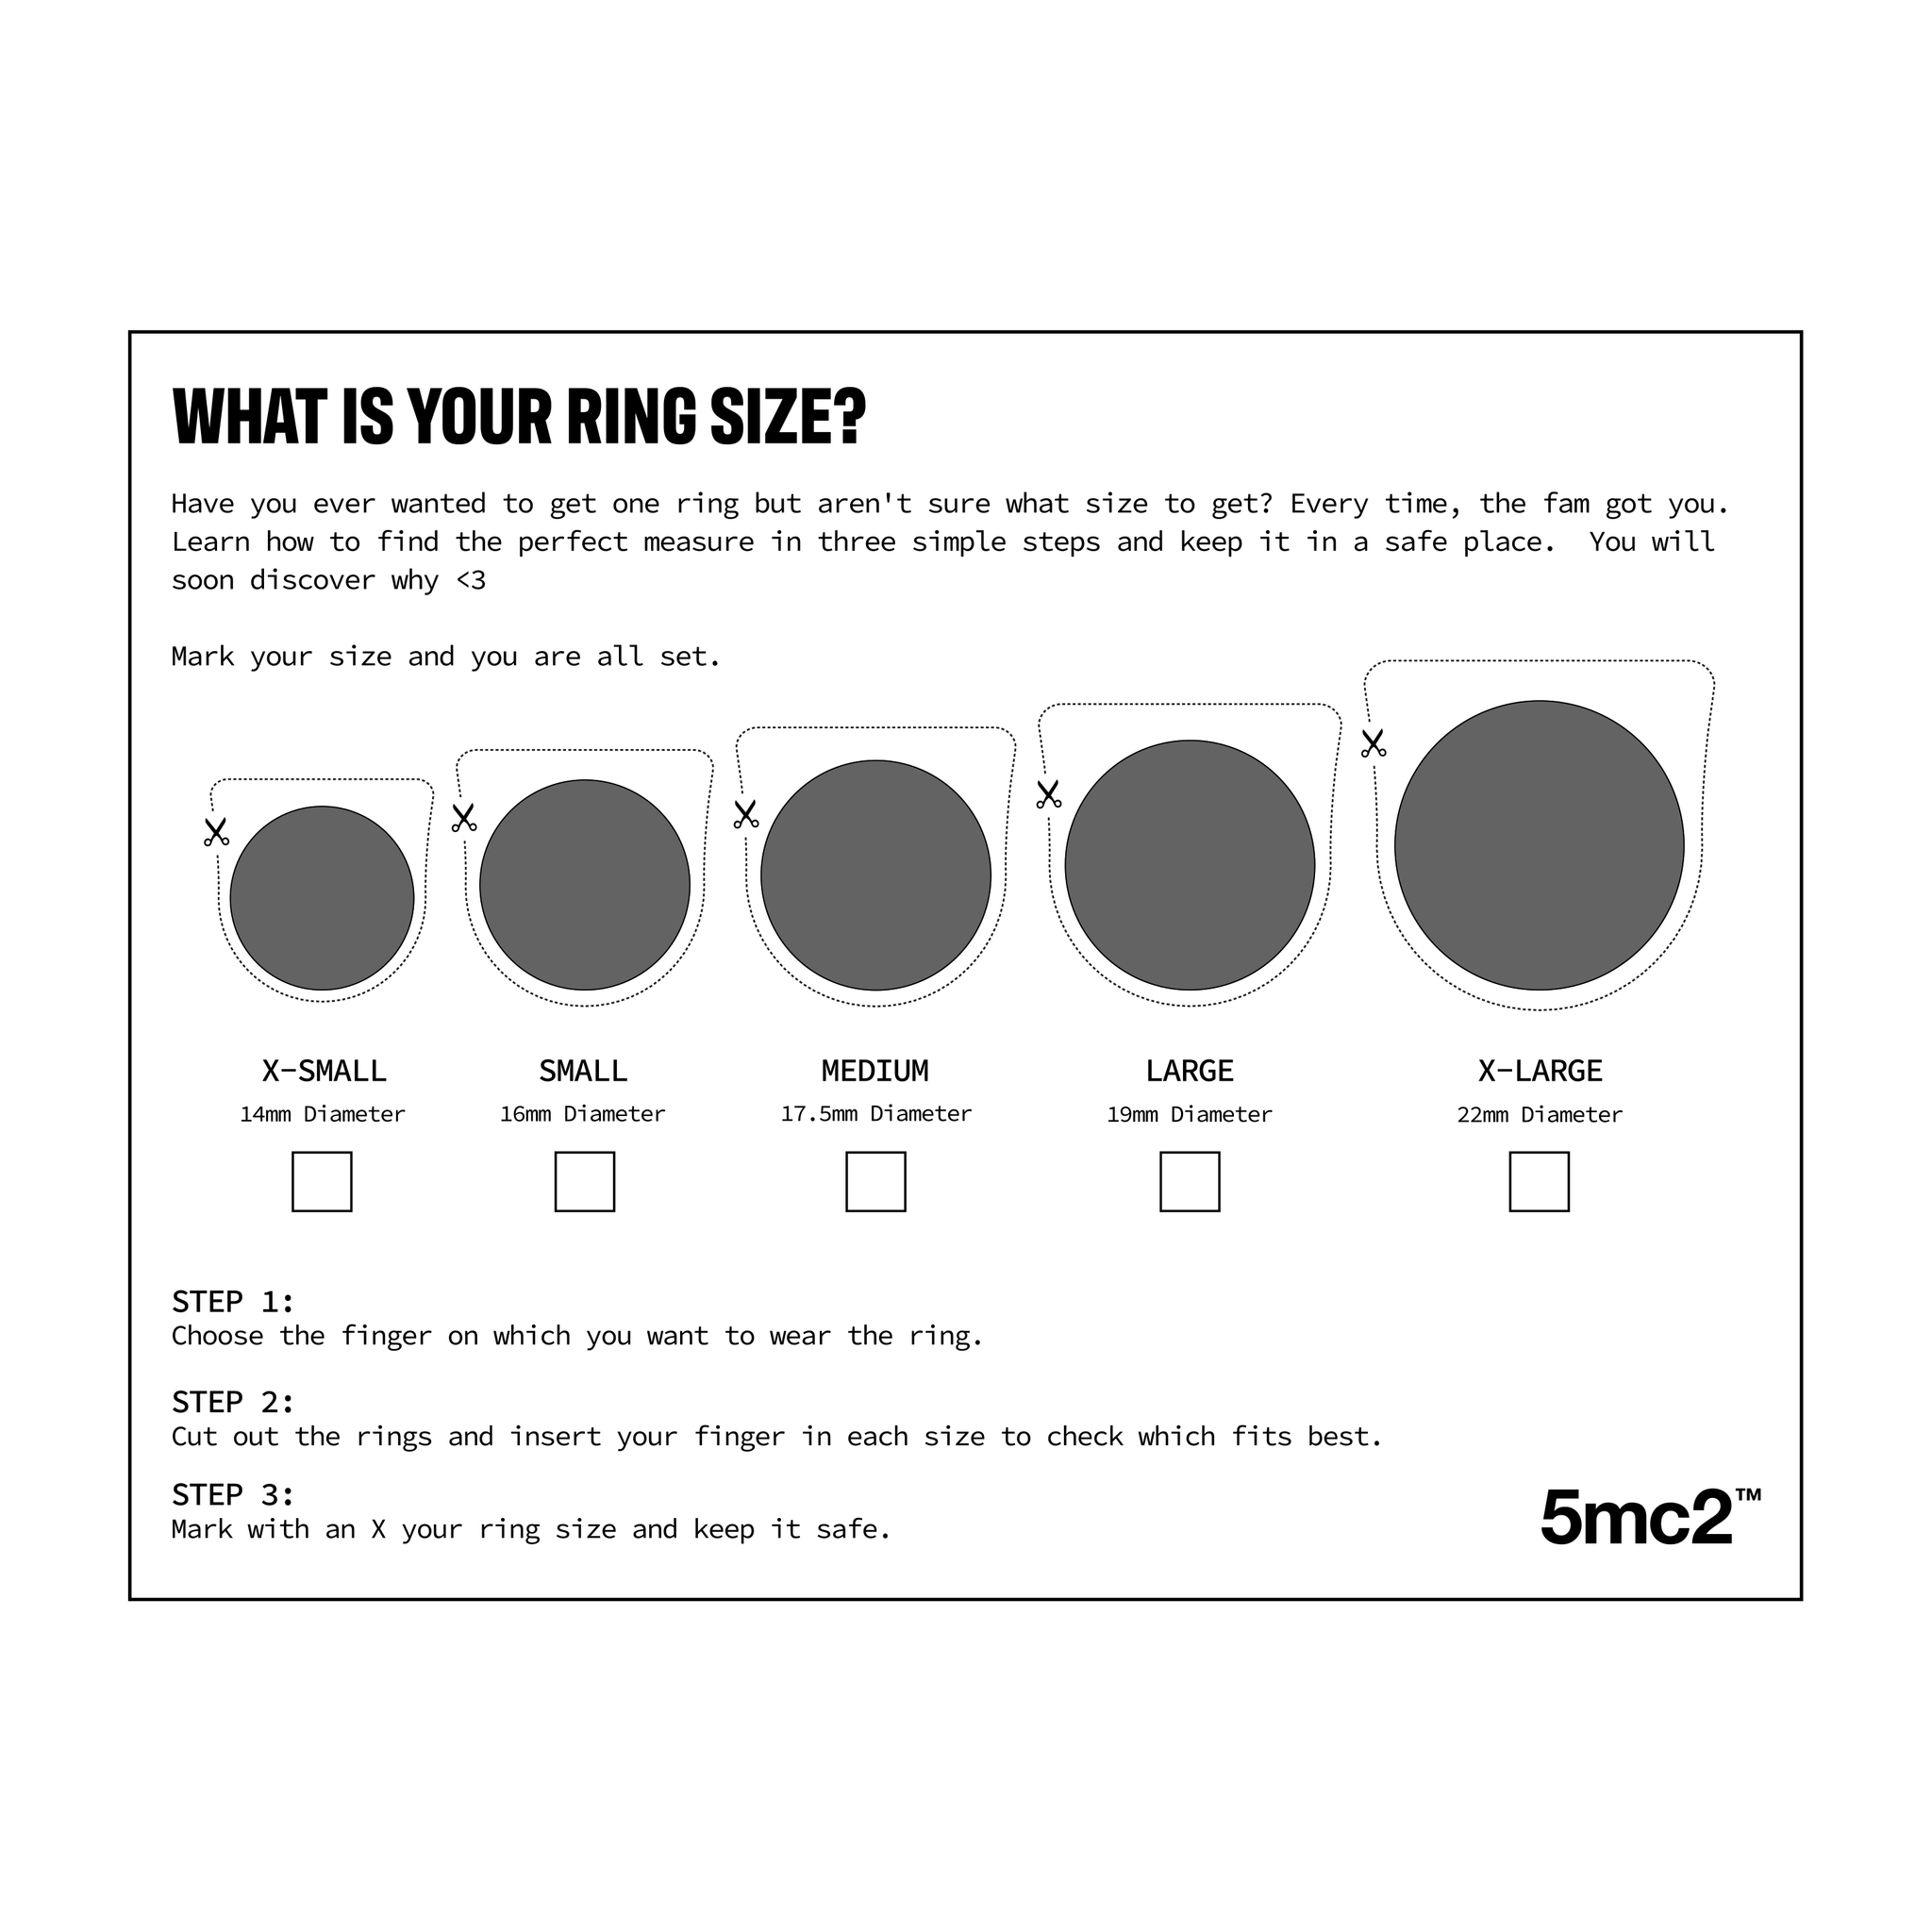 KNOW YOUR RING SIZE - 5mc2™